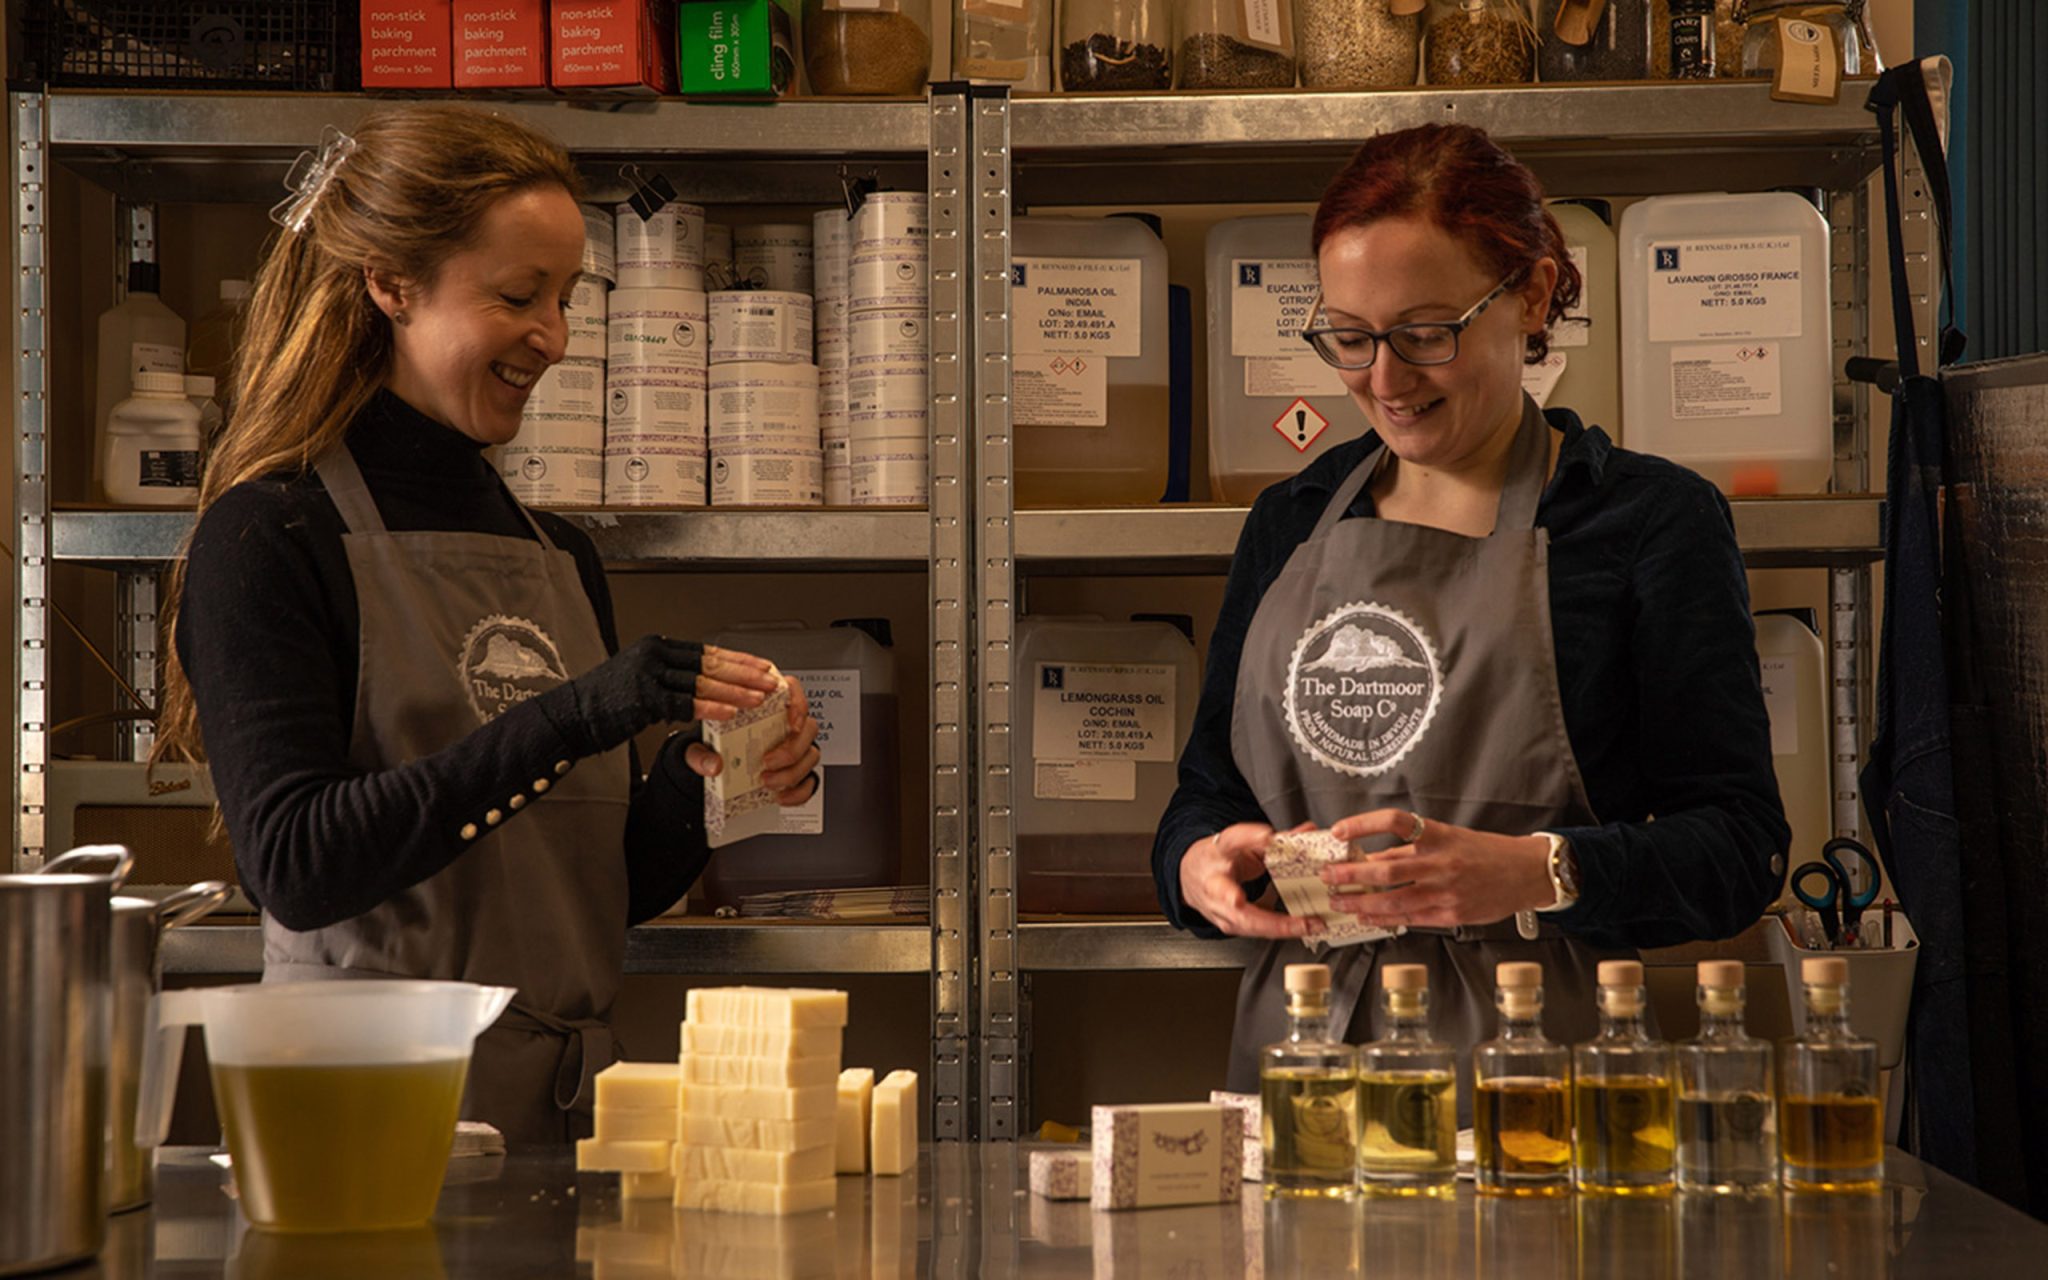 Dartmoor-Soap-Company Award-Winning natural soap and skincare products, handmade using only natural ingredients #We Are Dartmoor. Part of the story commissioned by DNPA celebrating the people who make their livelihoods within the boundaries of Dartmoor National Park.